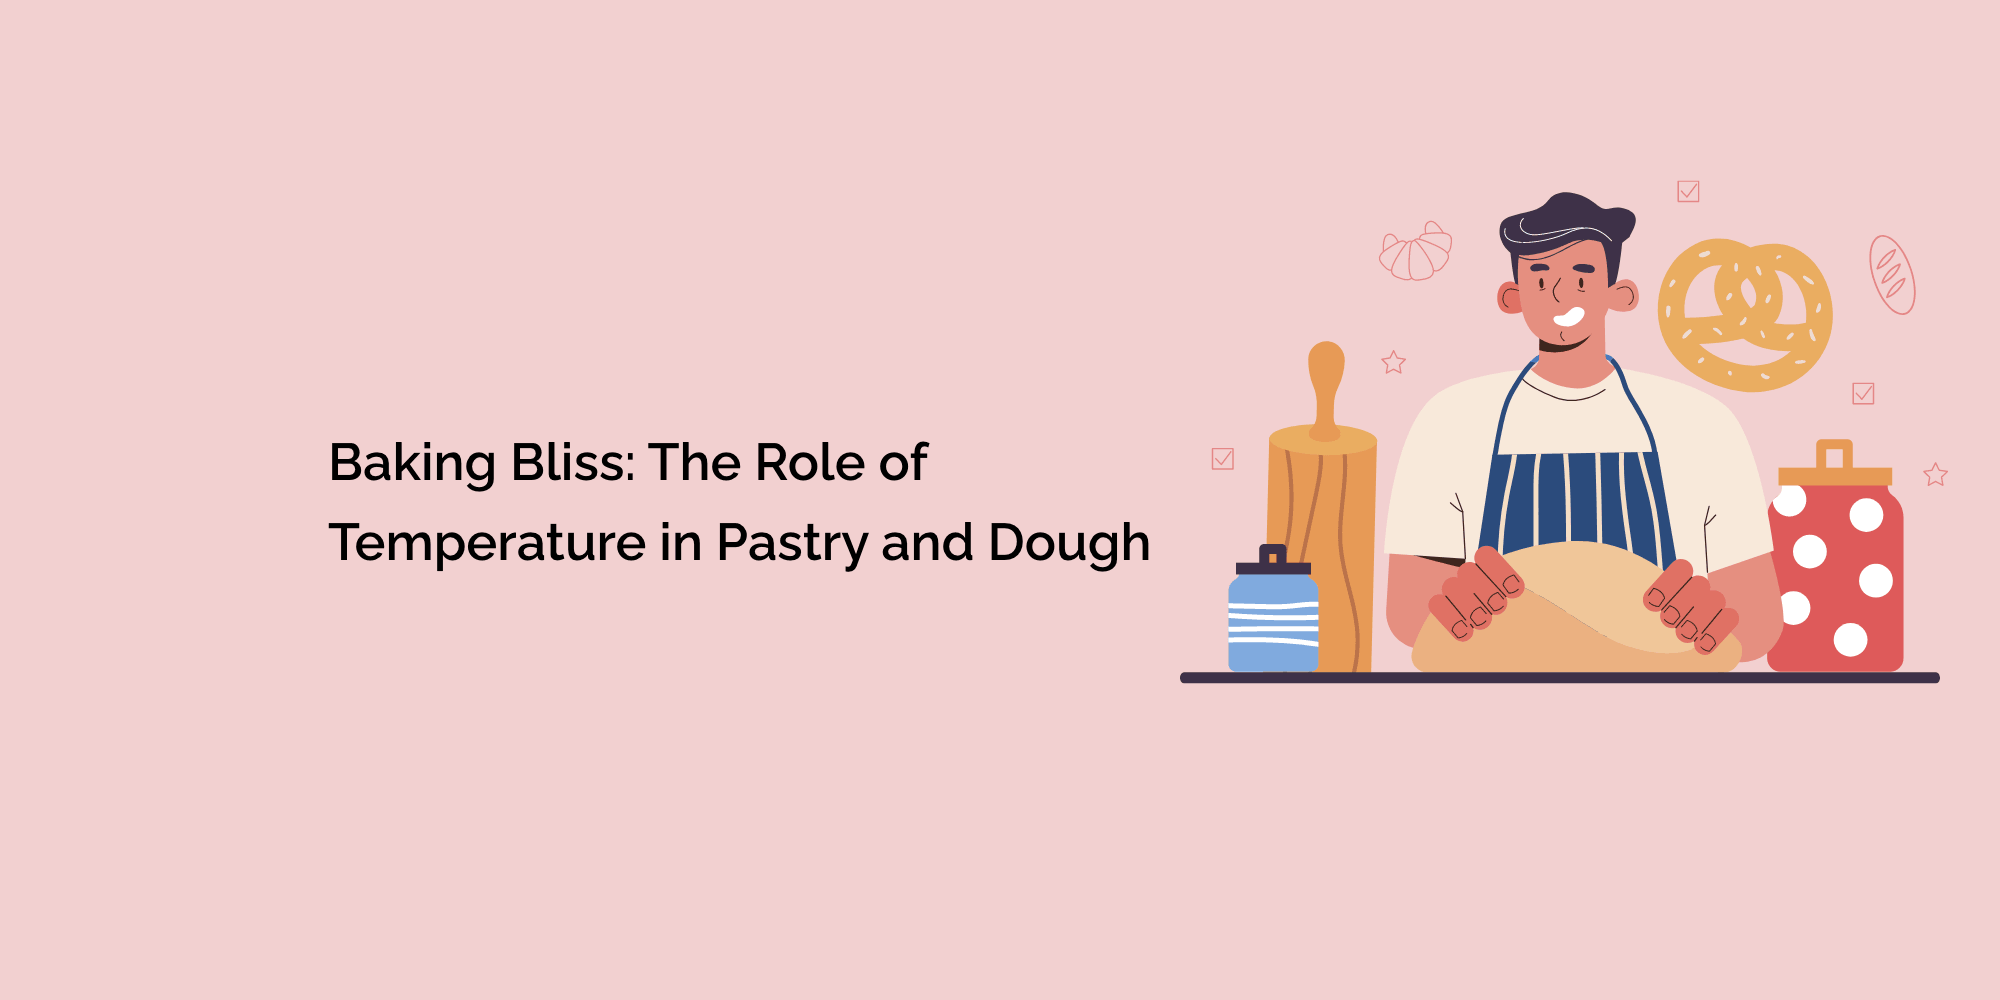 Baking Bliss: The Role of Temperature in Pastry and Dough